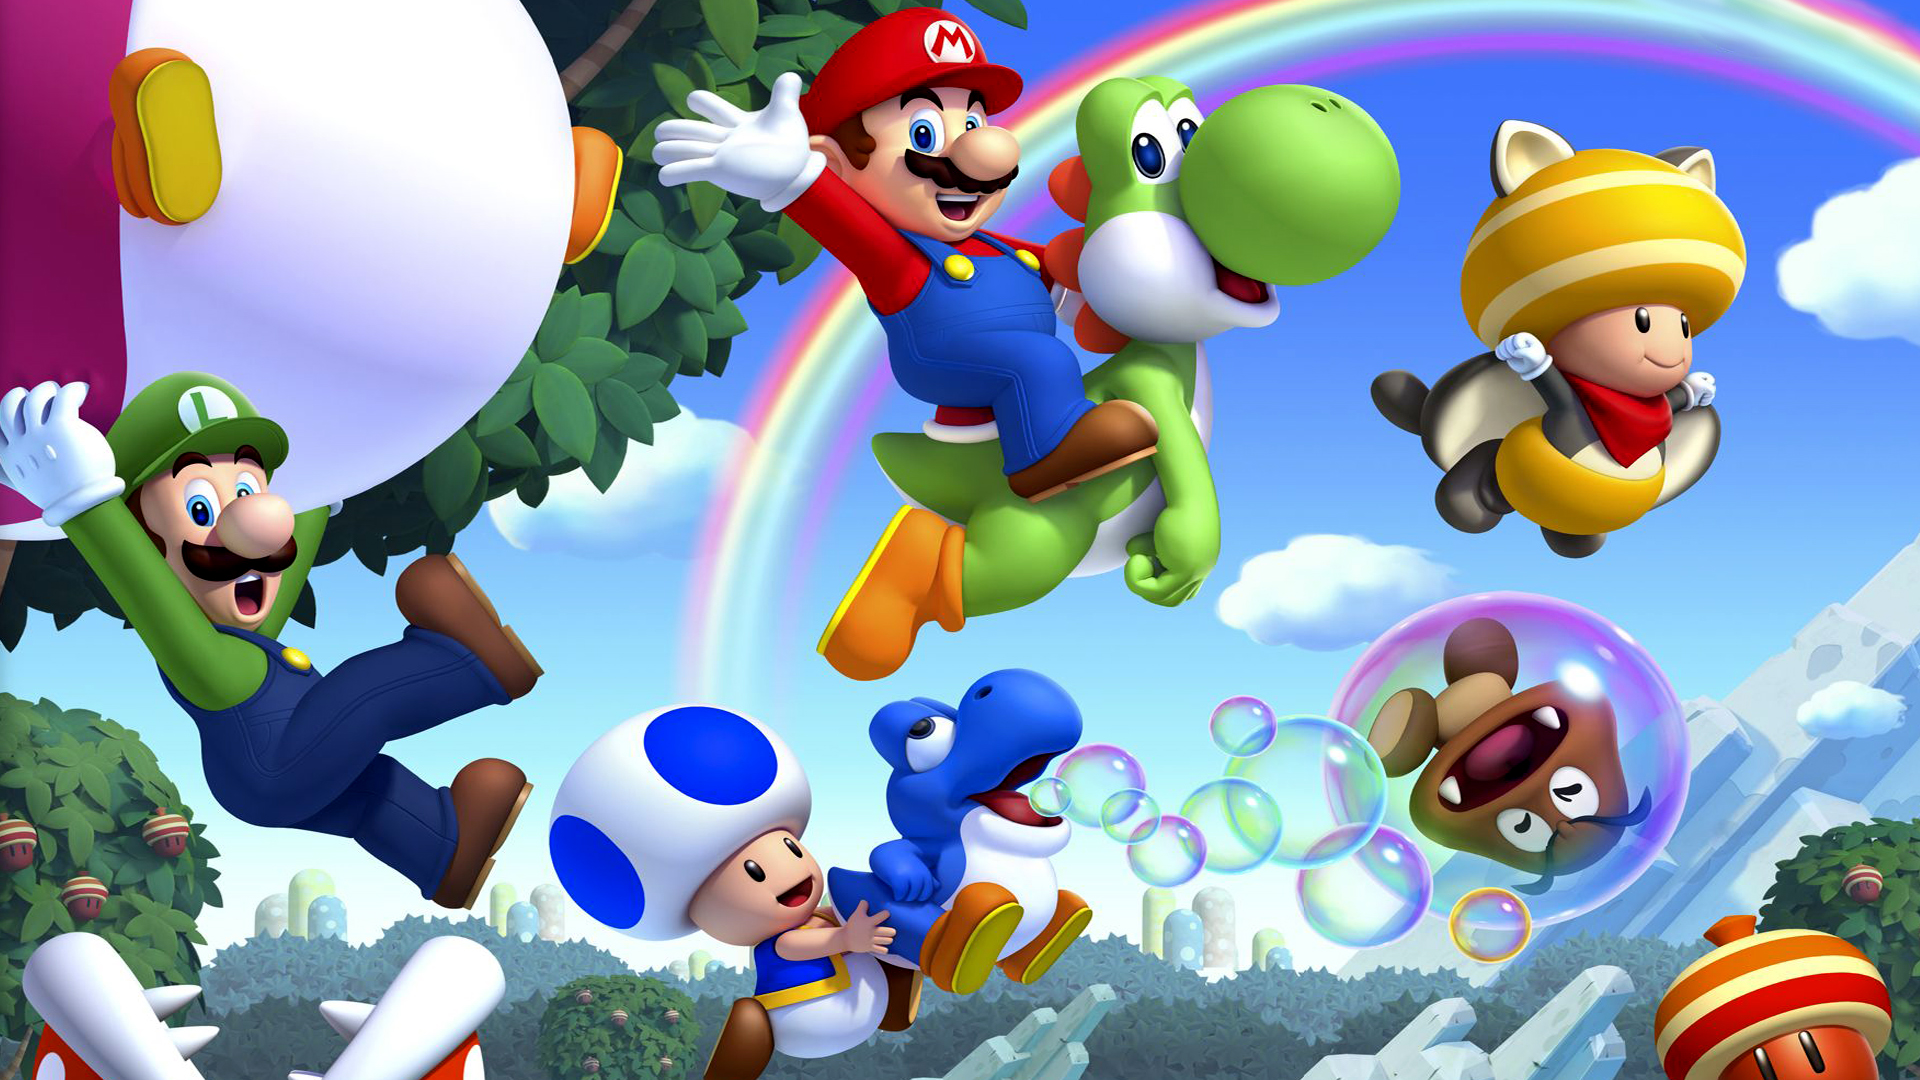 Super Mario Characters Wallpapers